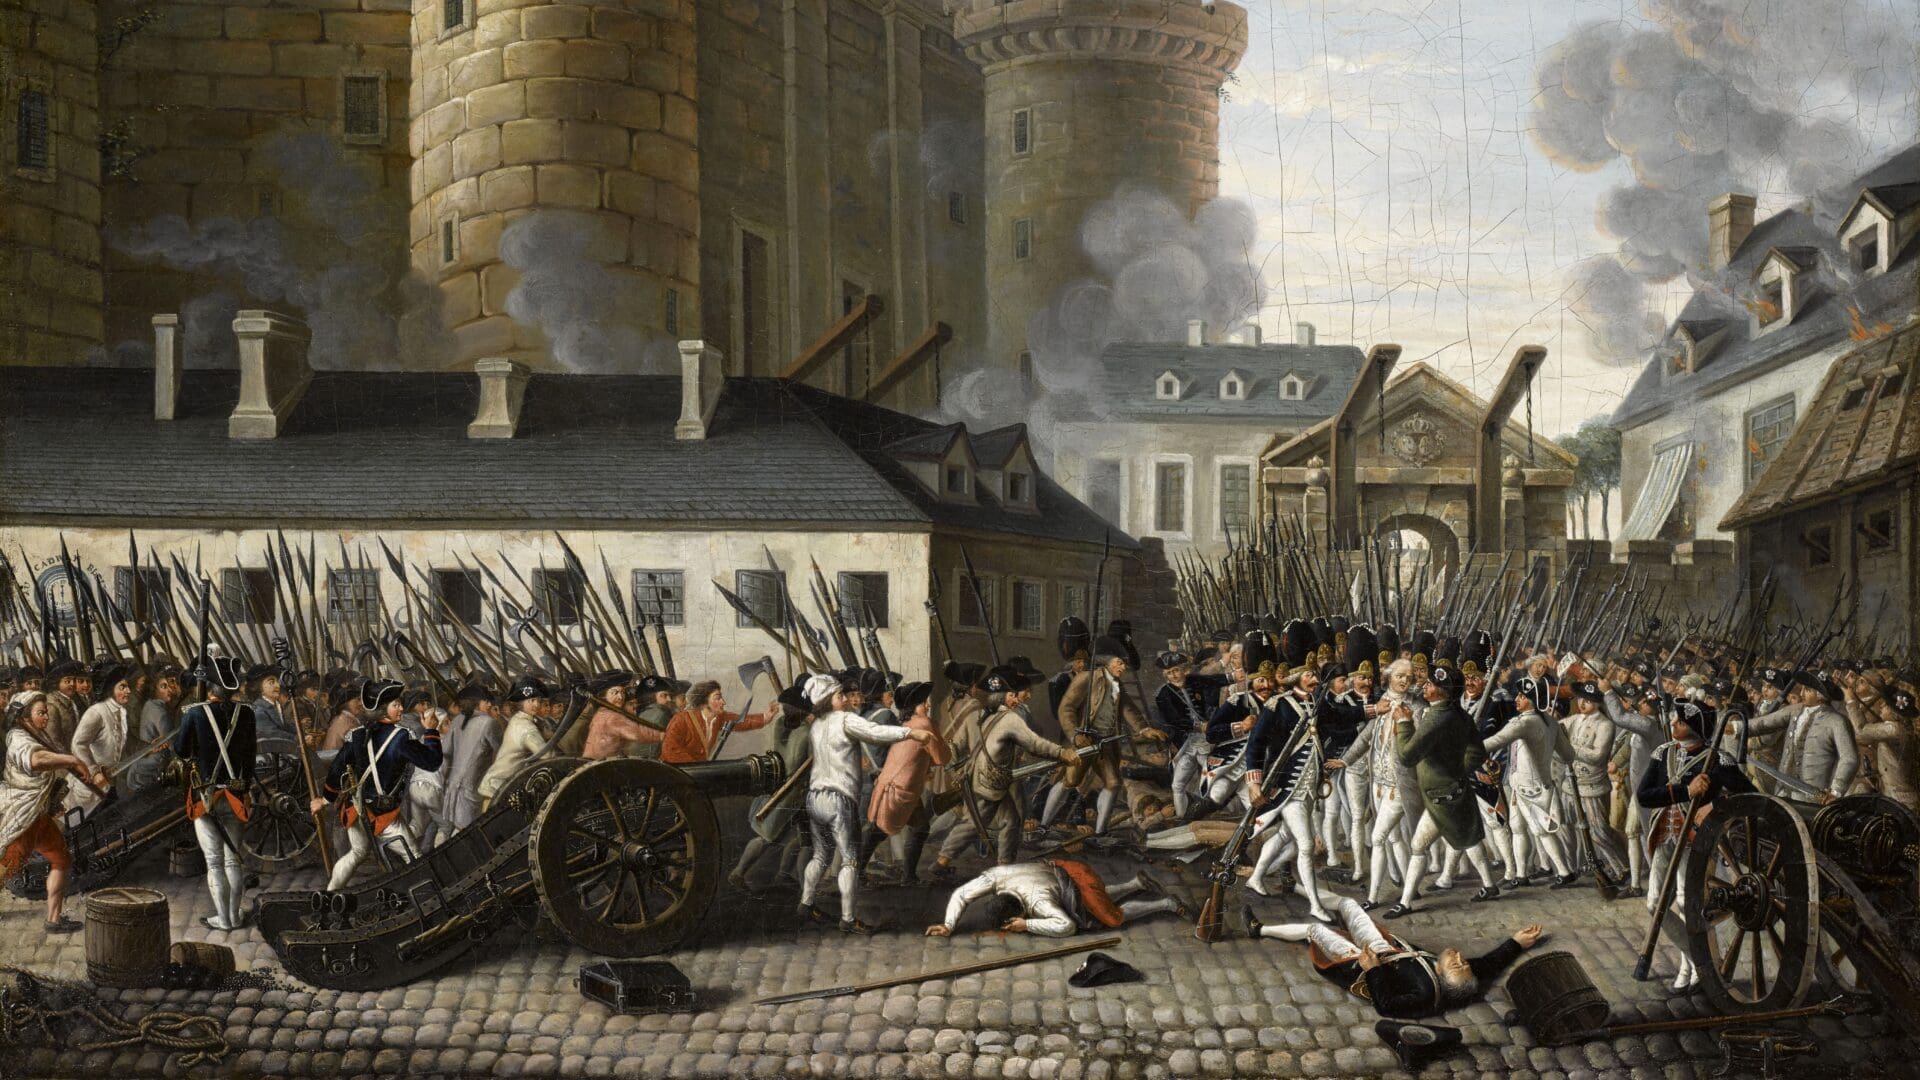 Storming of the Bastille on 14 July 1789.